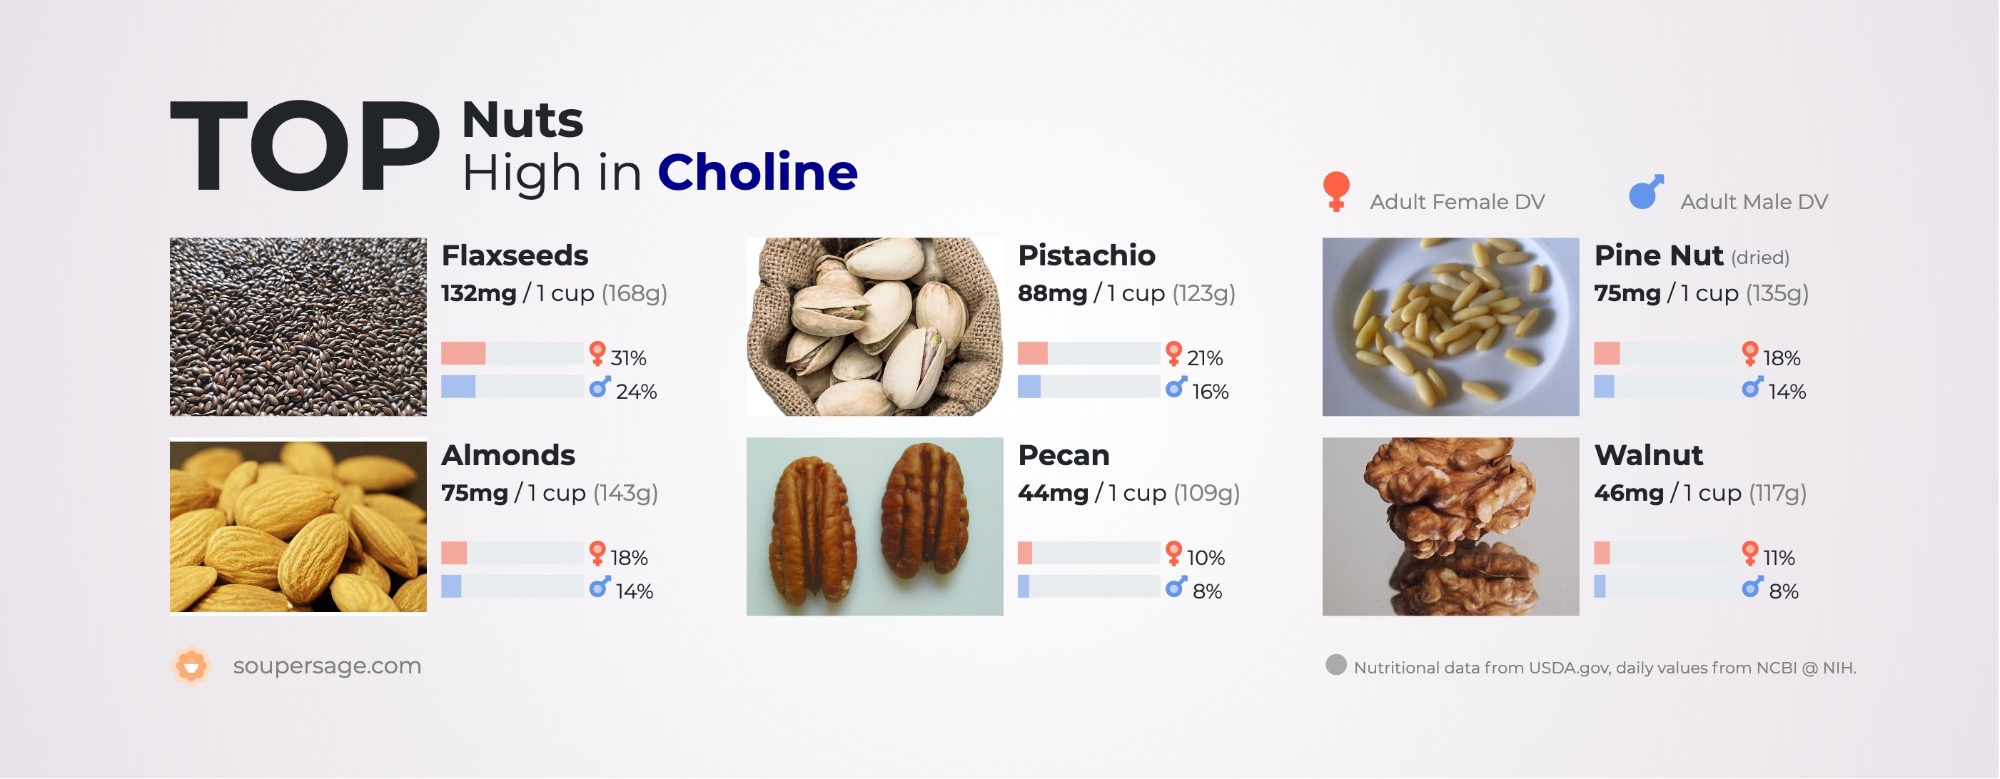 image of Top Nuts High in Choline